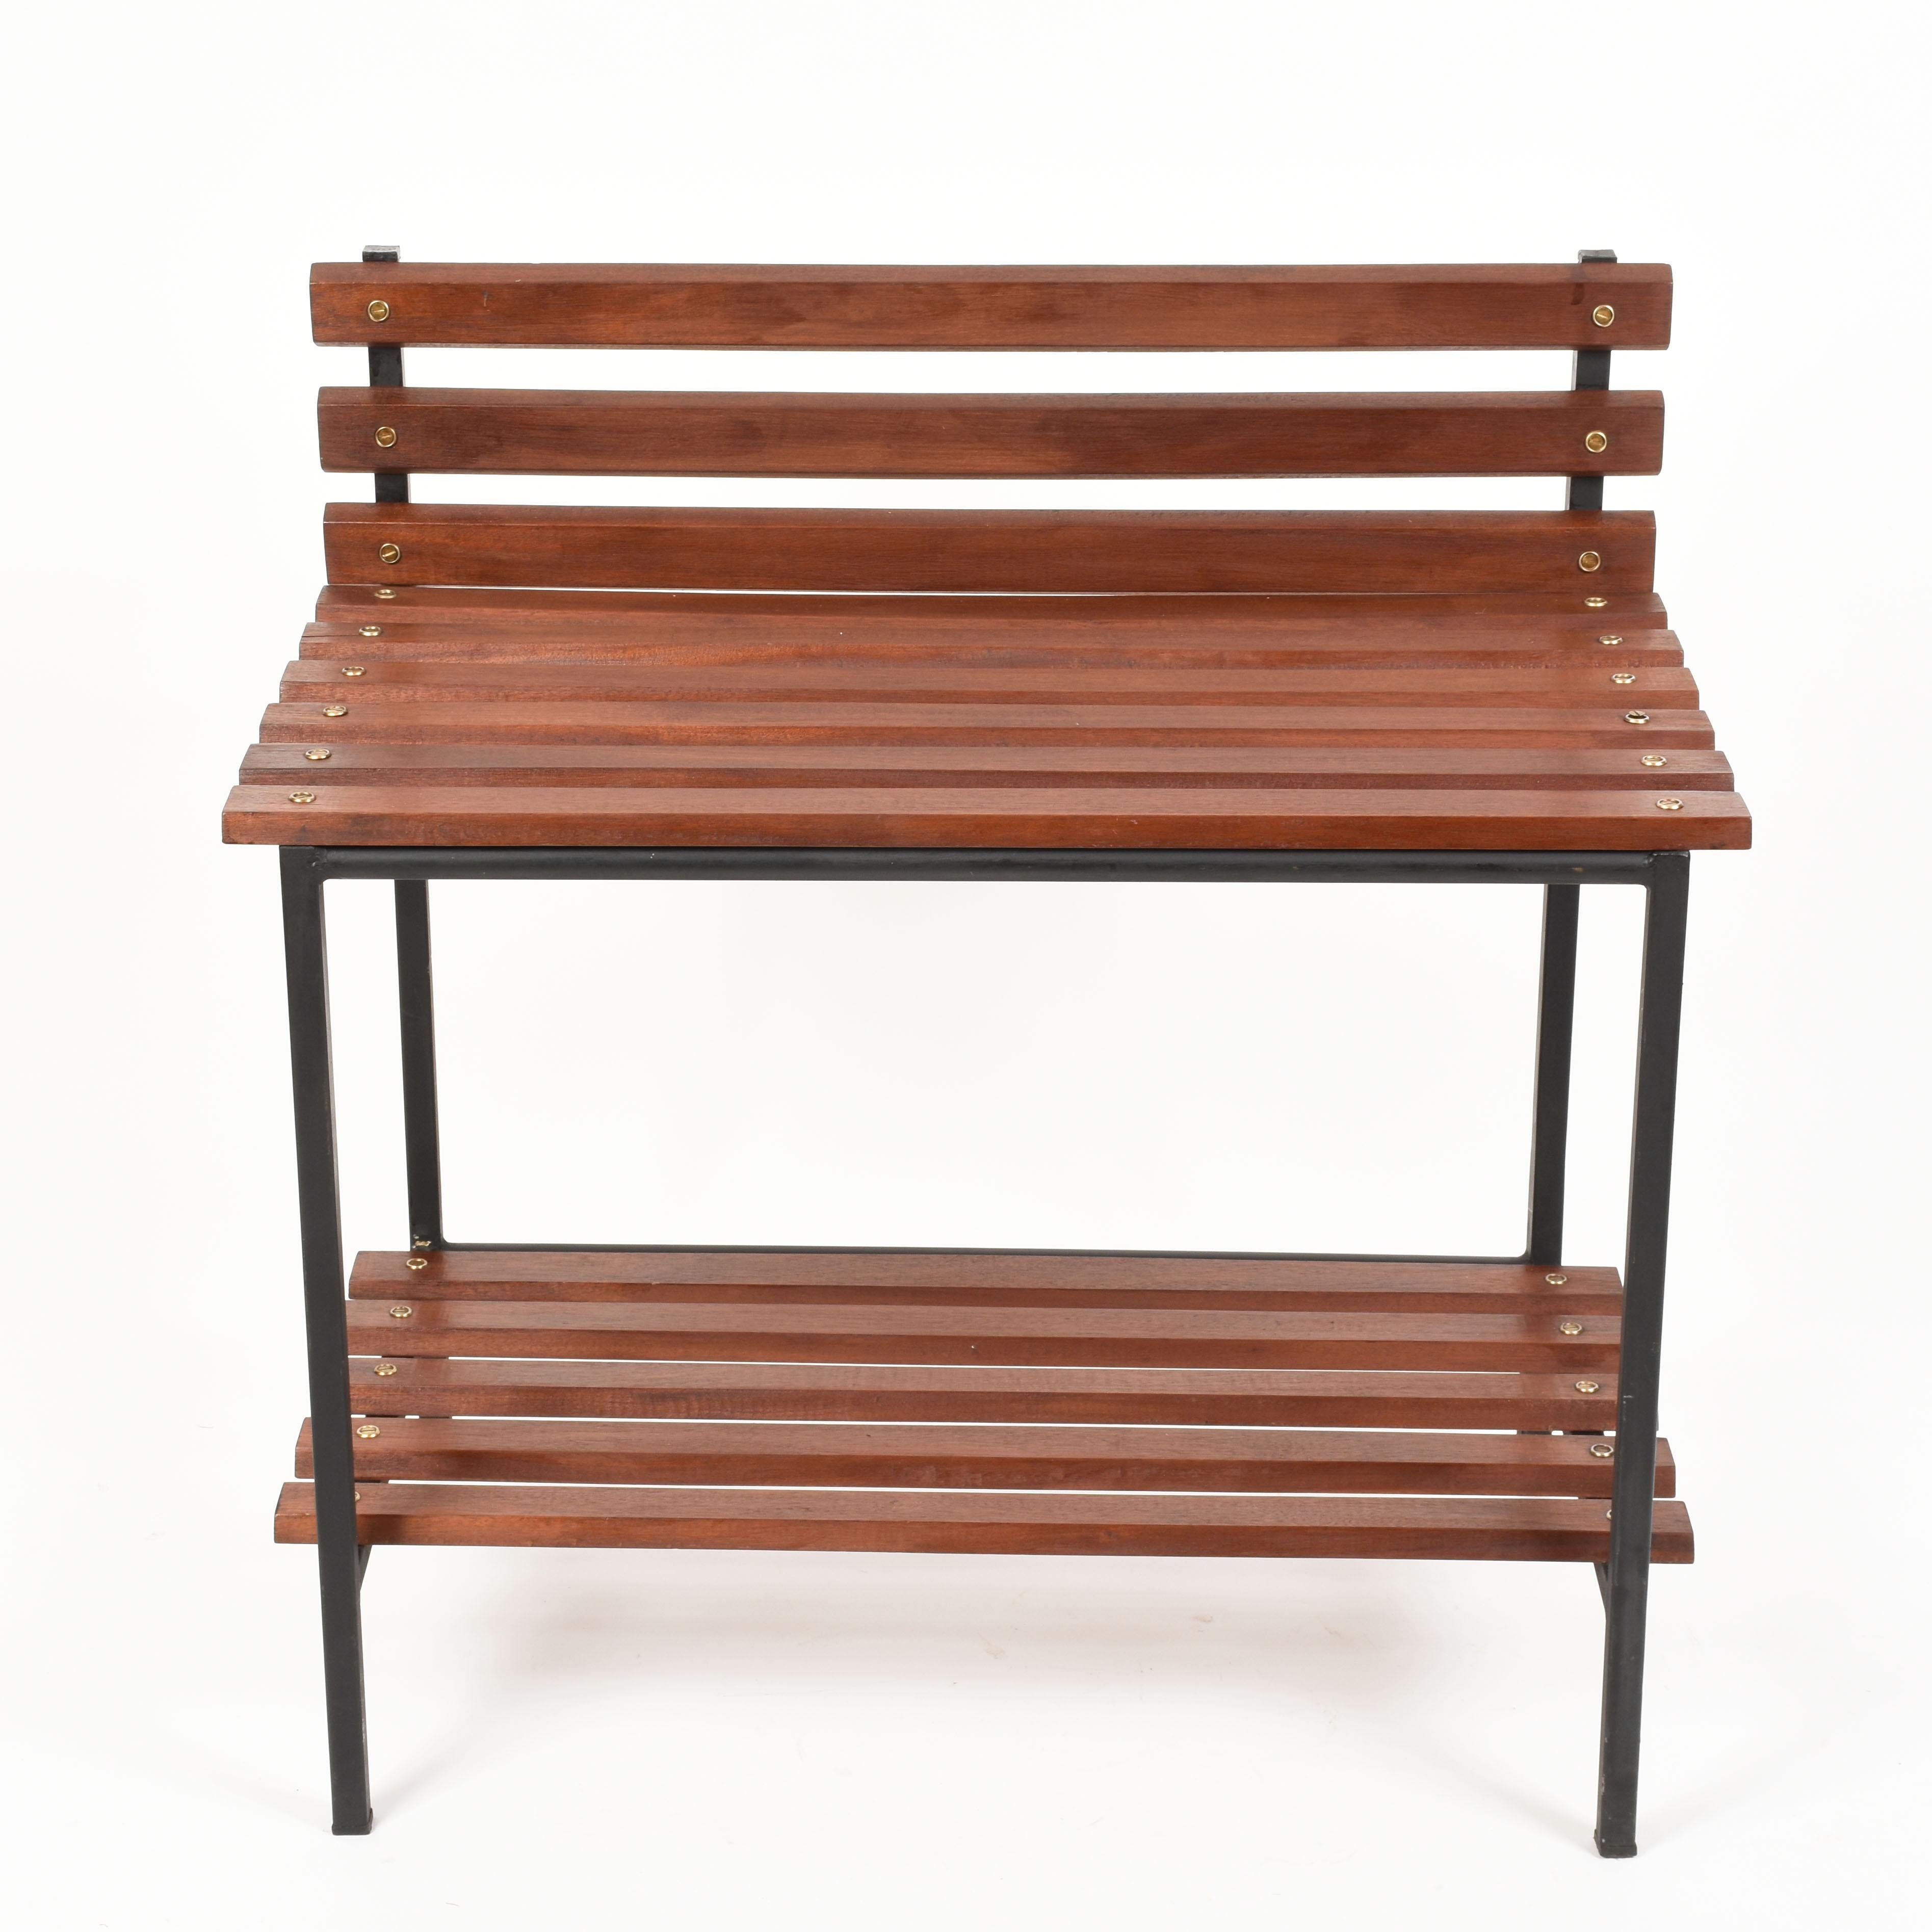 Midcentury teak, black enameled metal and brass bench. This wonderful piece was produced in Italy, during 1960s.

This bench is awesome as it has two floors and the horizontal lines are in teak while the vertical ones are in black enameled metal